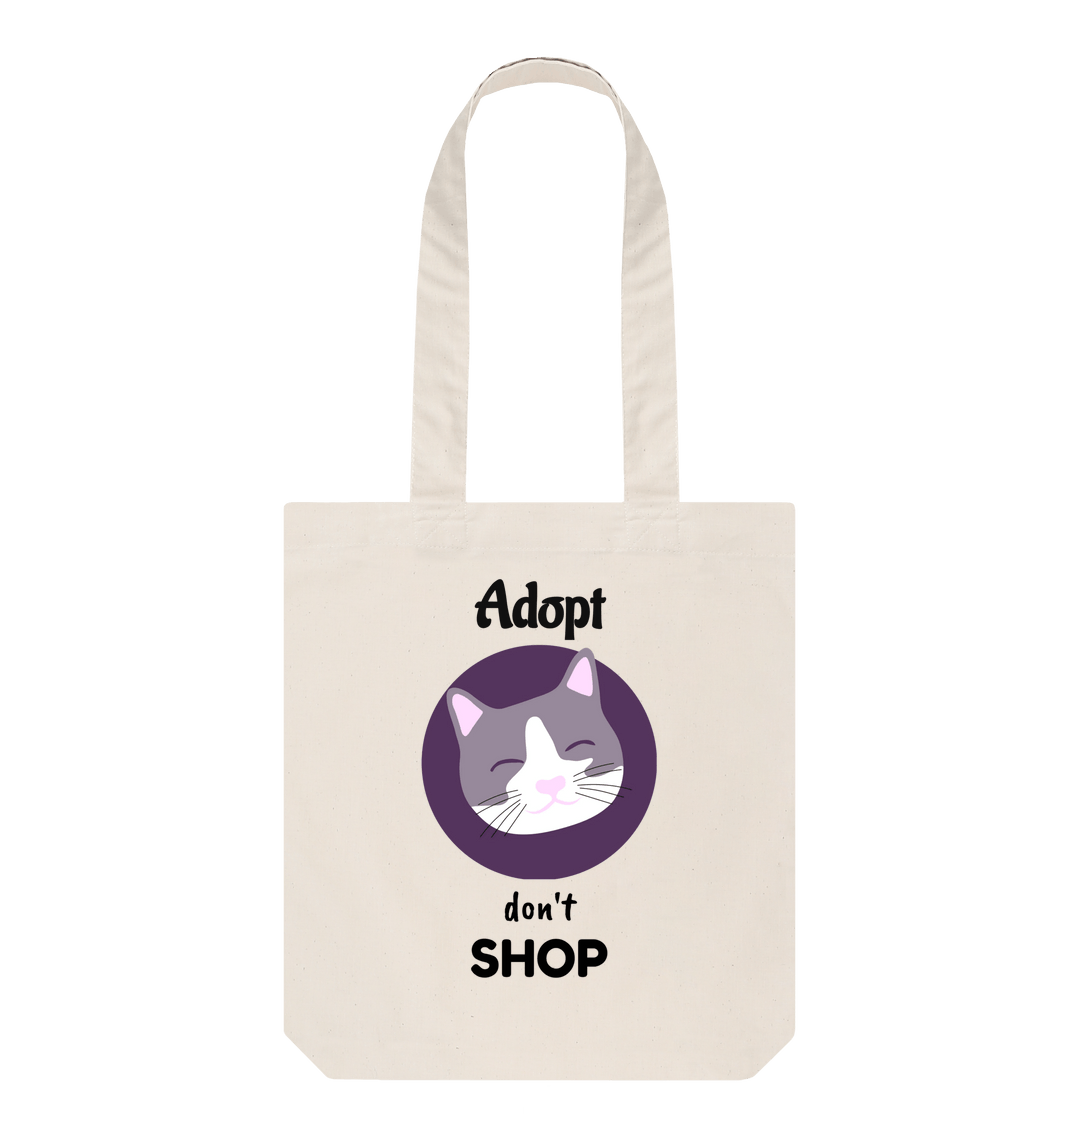 #AD Adopt Don't Shop Tote Bag purrsfullofloveshop.teemill.com/collection/tot… Help plant a tree this weekend with every order #teemill #buyoneplantonetree #moretreesplease #caturday #vegantshirts #saveanimals #savetheplanet teemill.com/?aff=marie